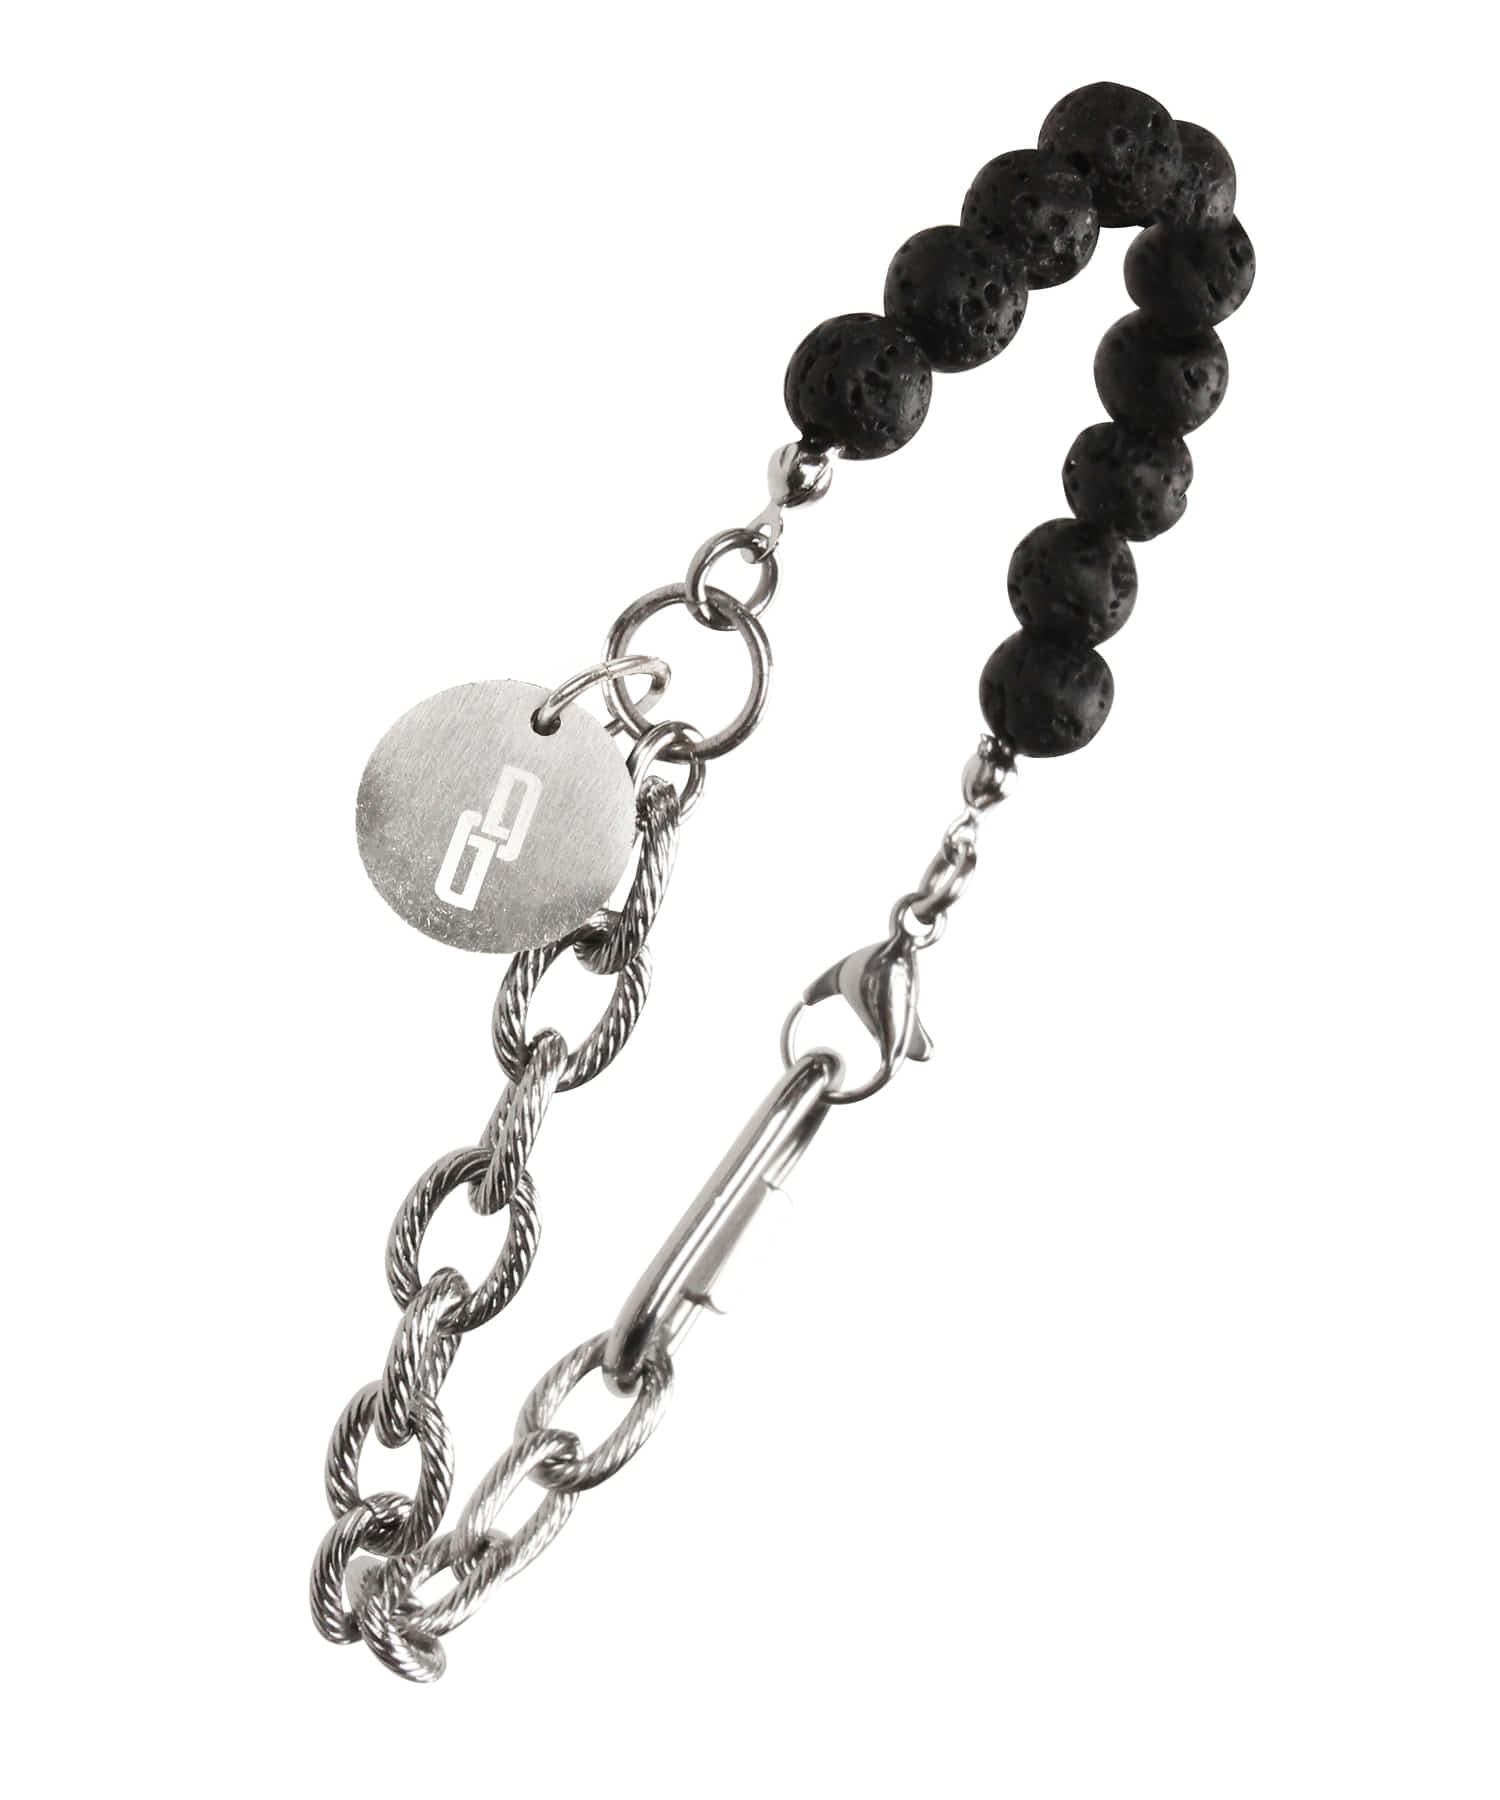 Volcanic Stone Surgical Chain Bracelet